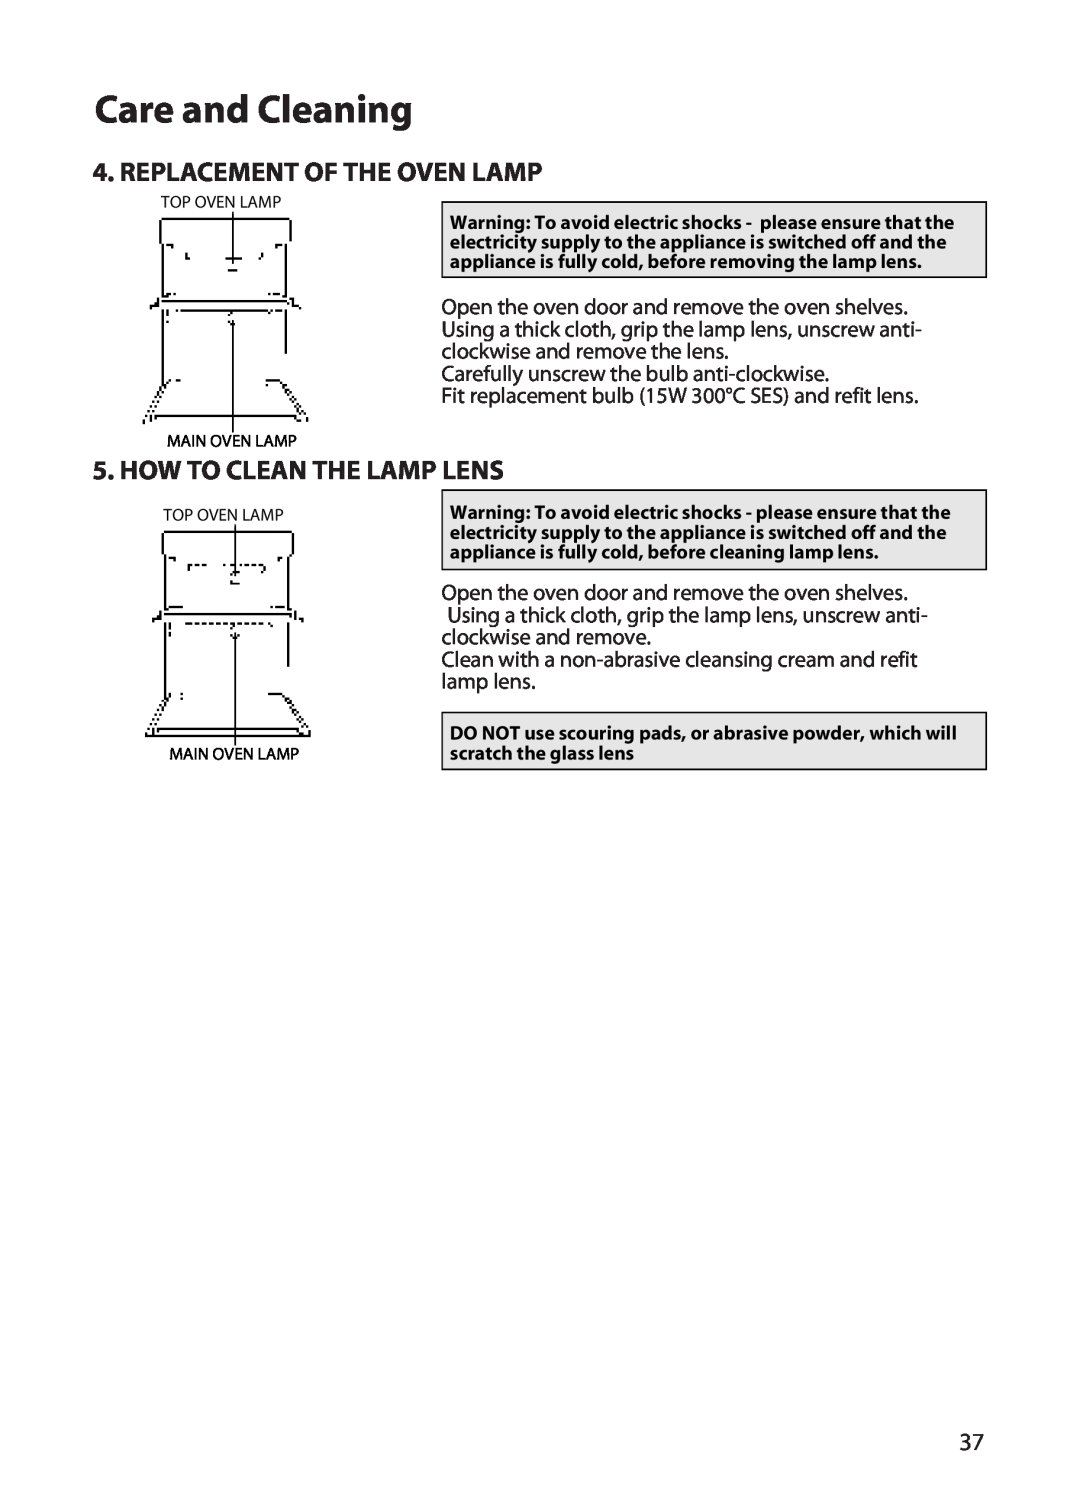 Hotpoint DD77 DT77 manual Replacement Of The Oven Lamp, How To Clean The Lamp Lens, Care and Cleaning 